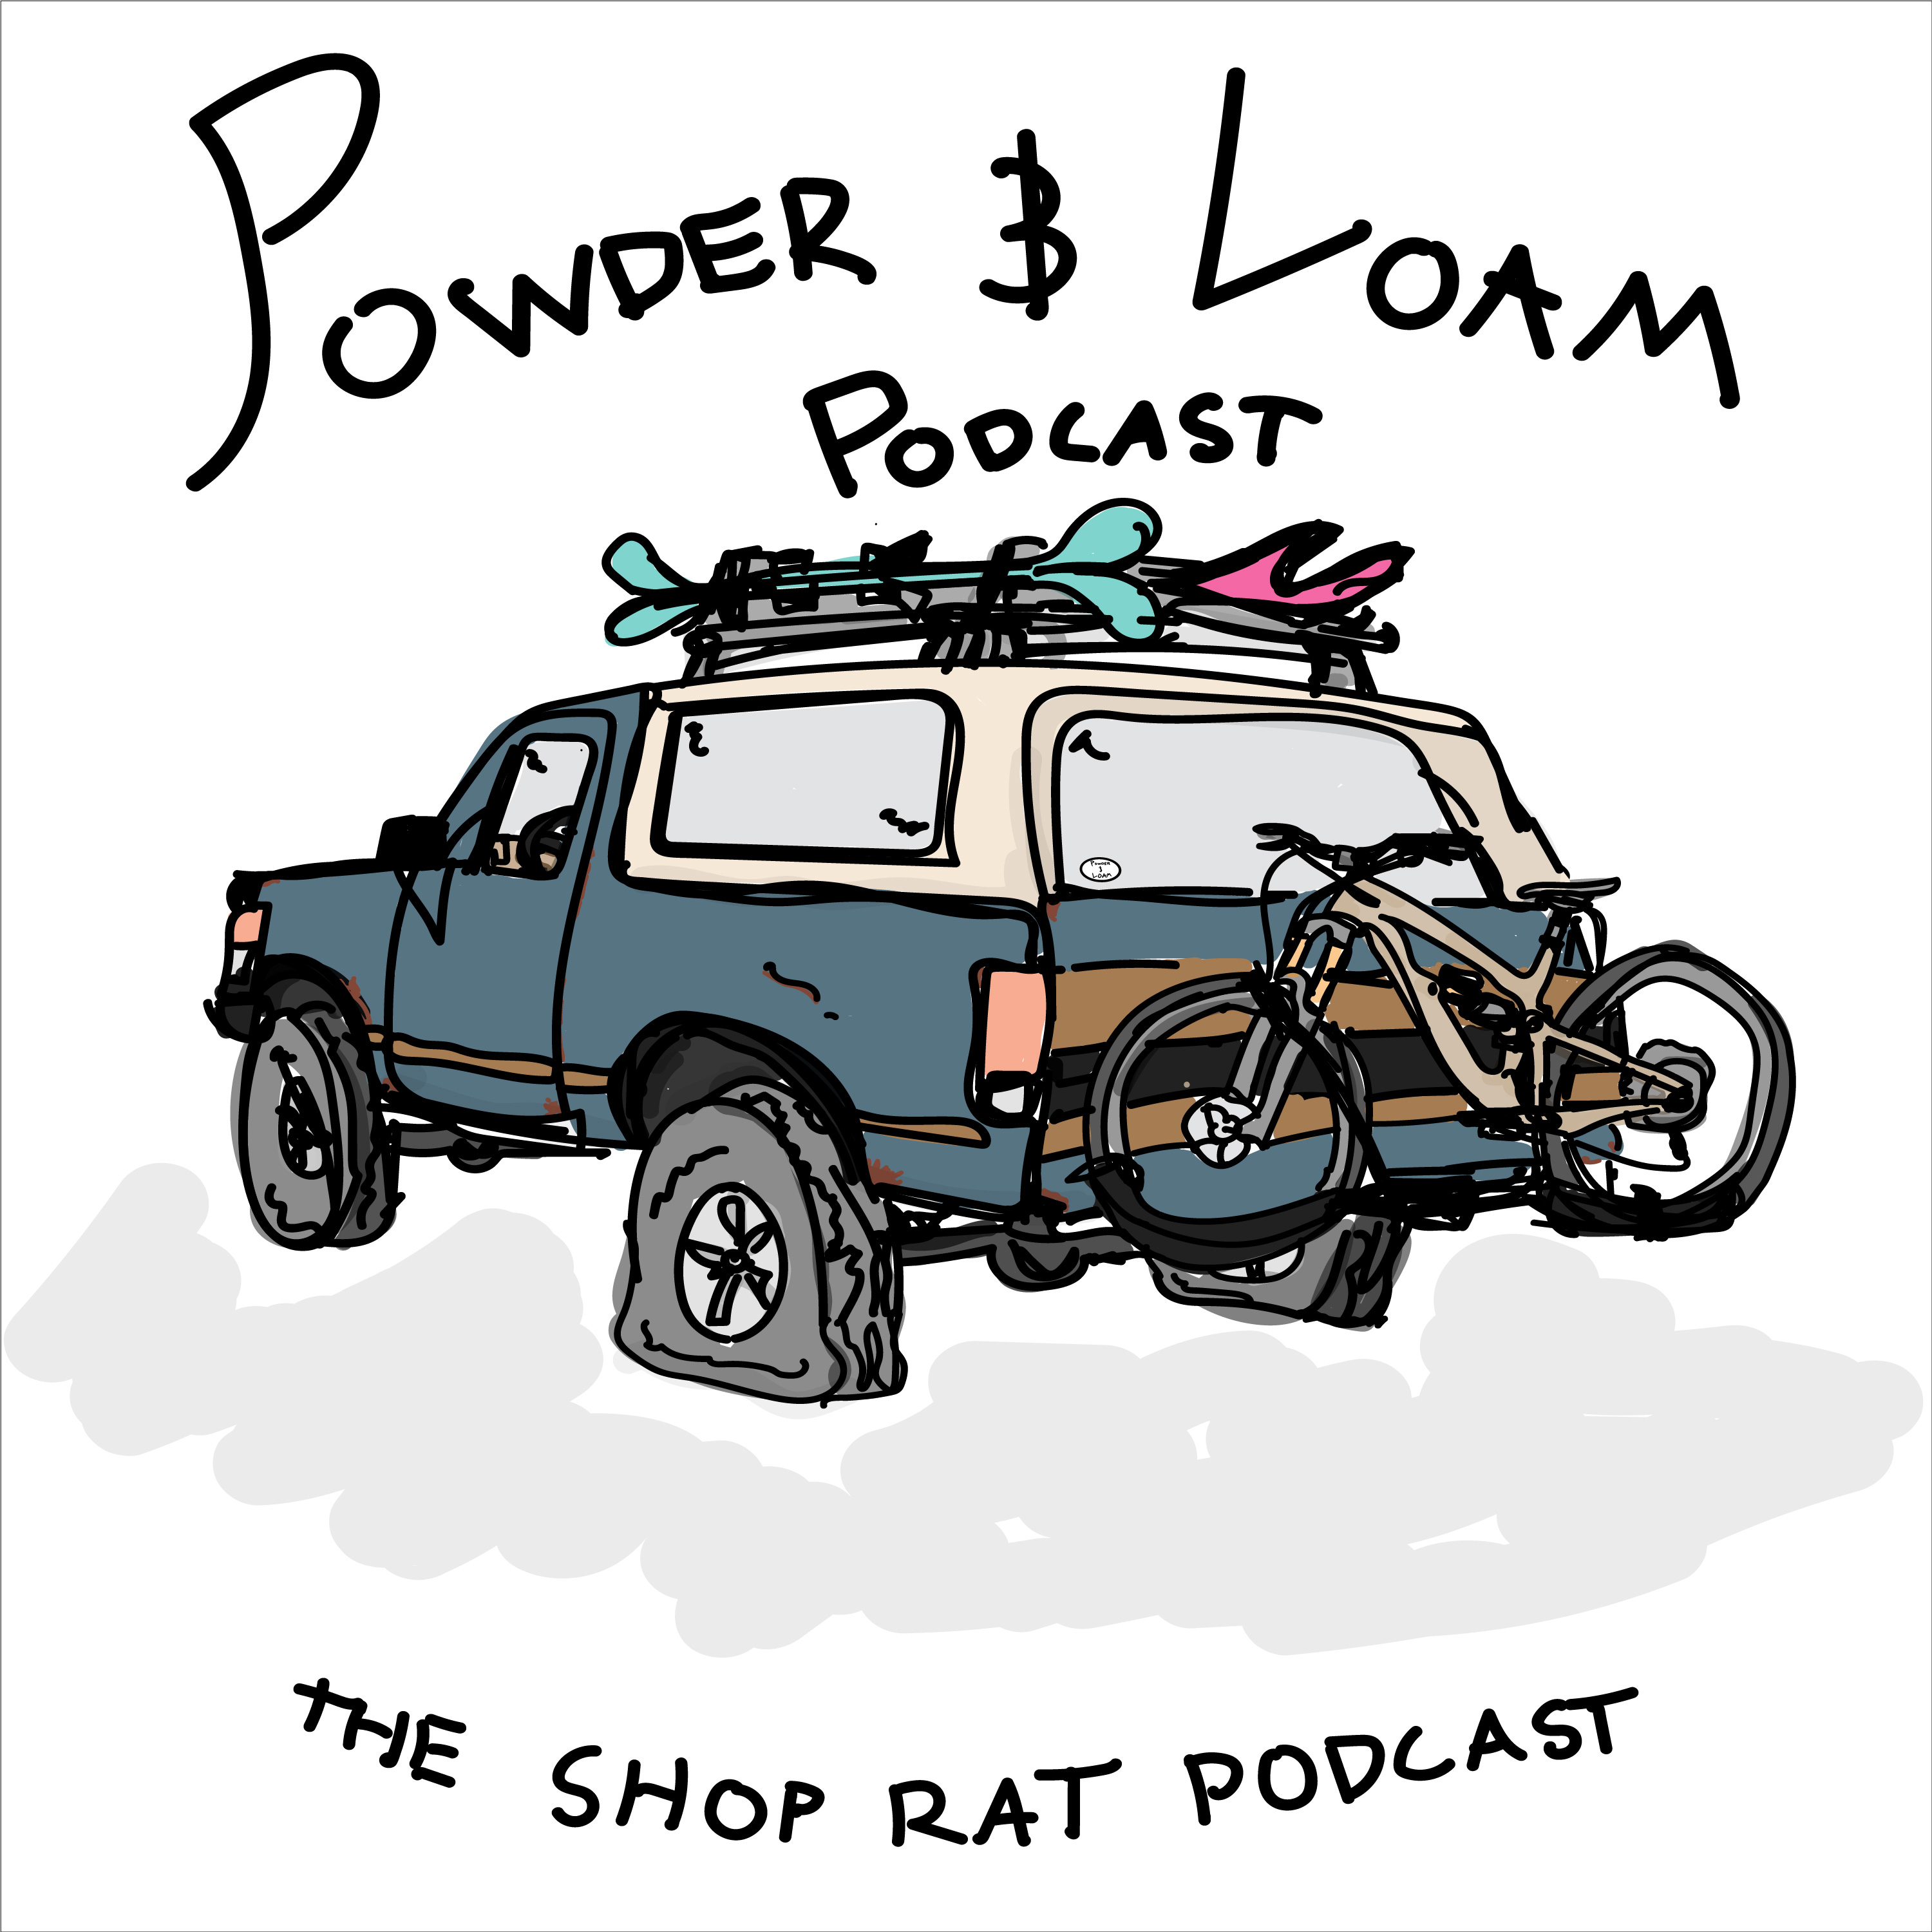 Powder and Loam Podcast